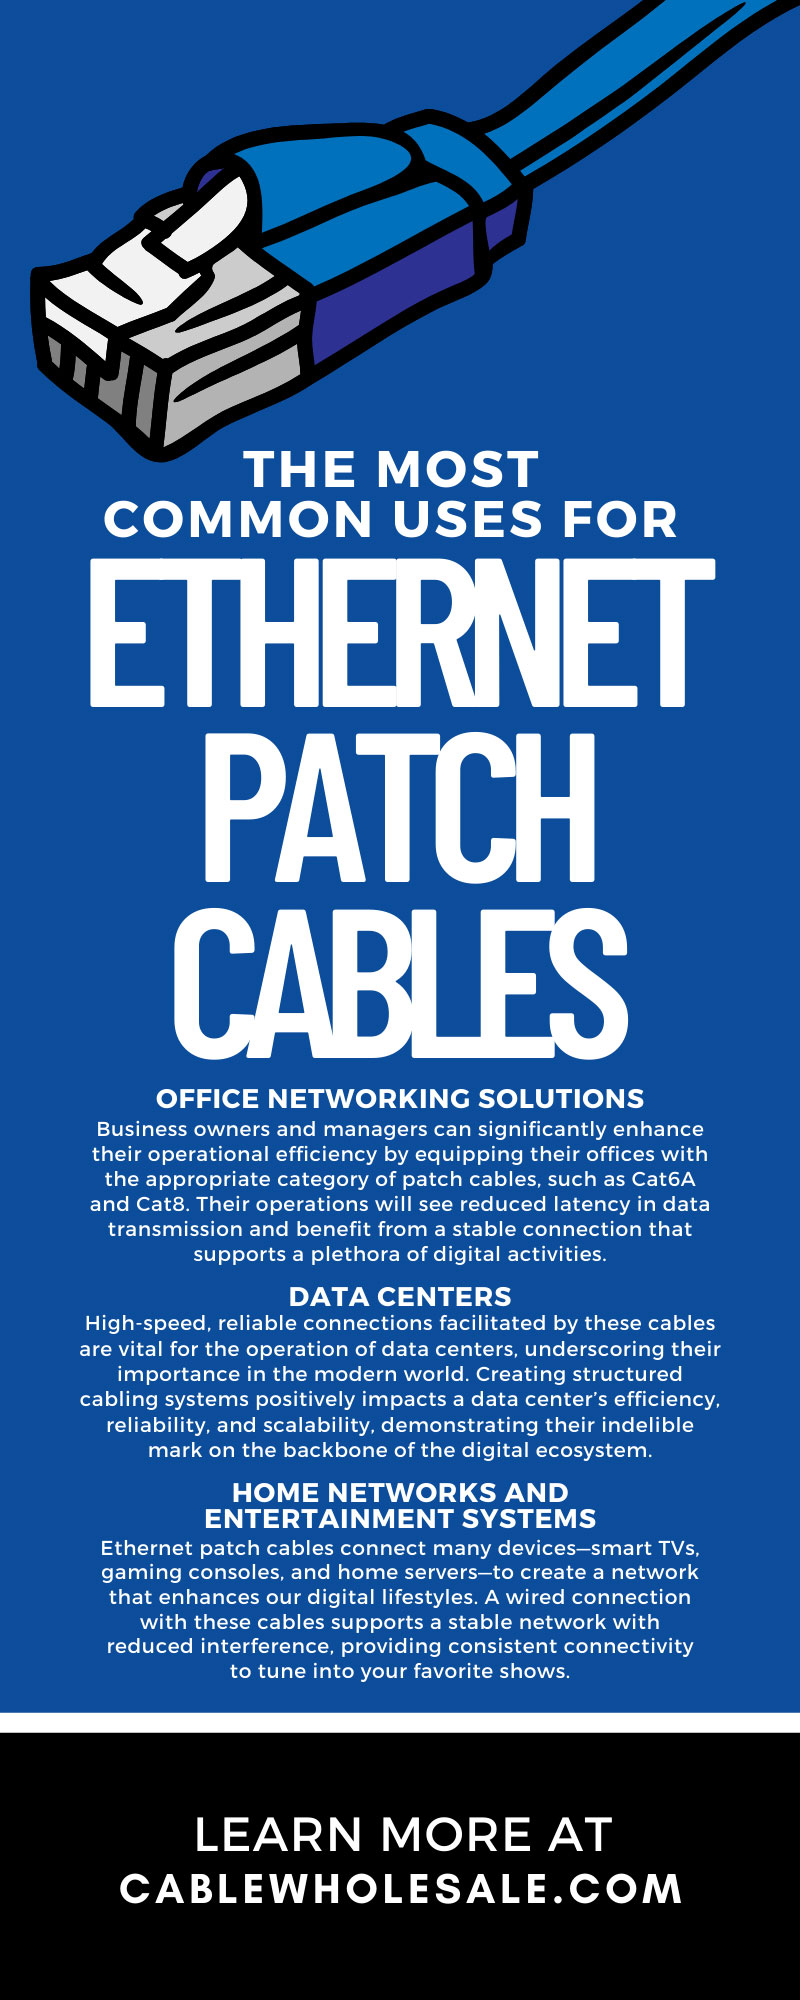 The Most Common Uses for Ethernet Patch Cables